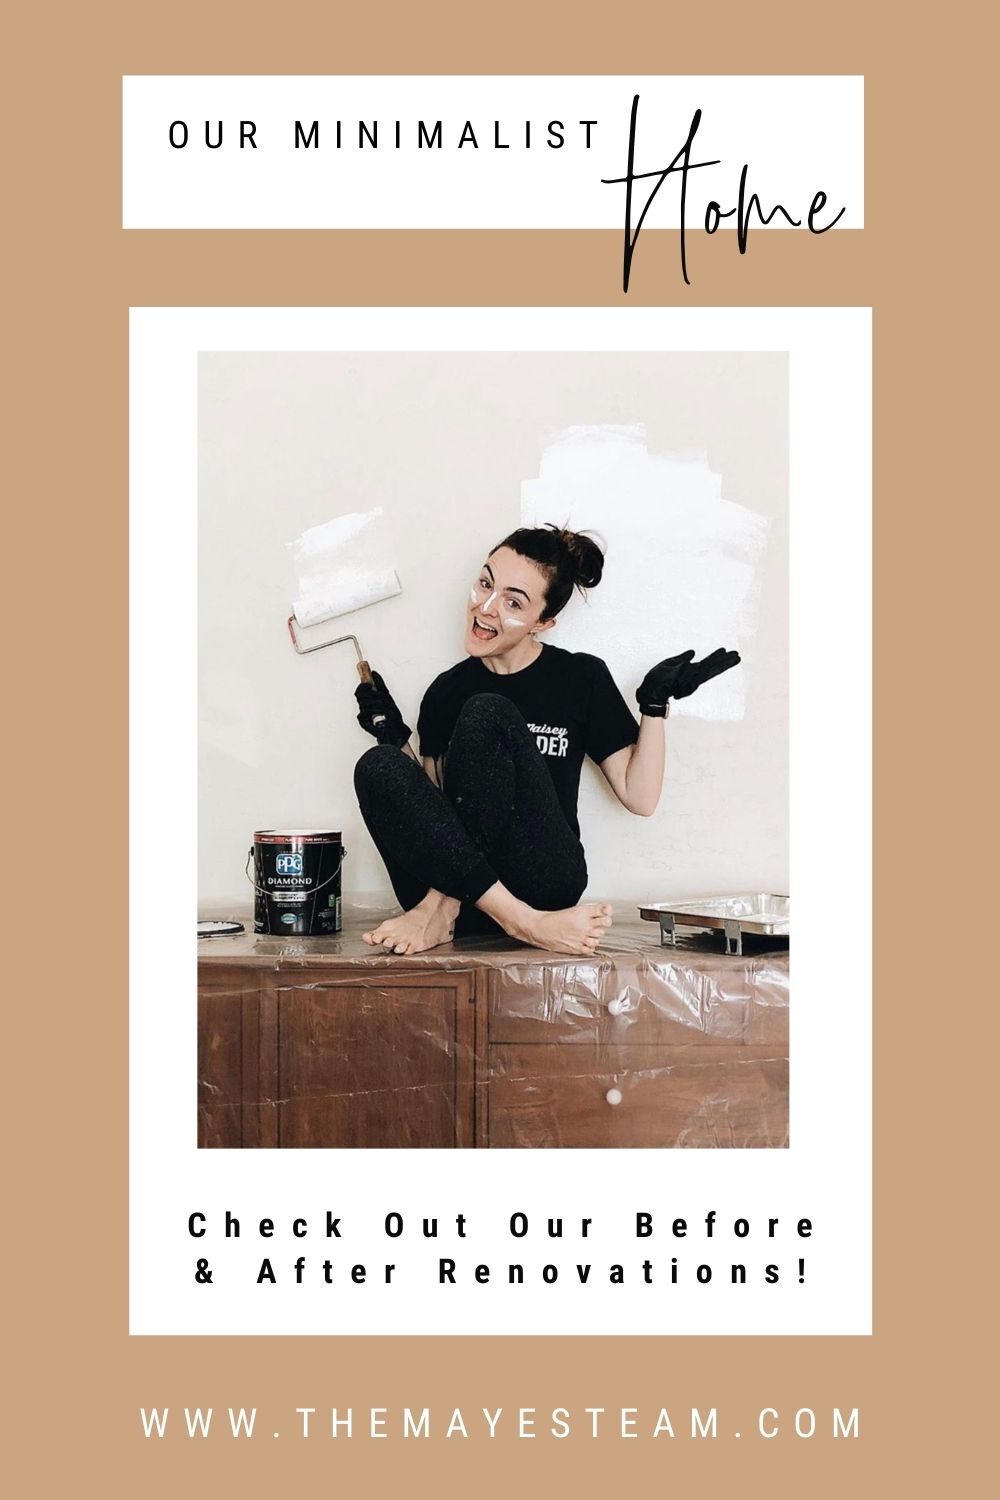 Debbie Mayes sit on top of a dresser smiling while holding a paint roller brush. Image overlaid with text that reads Our Minimalist Home Check Out Our Before & After Renovations!